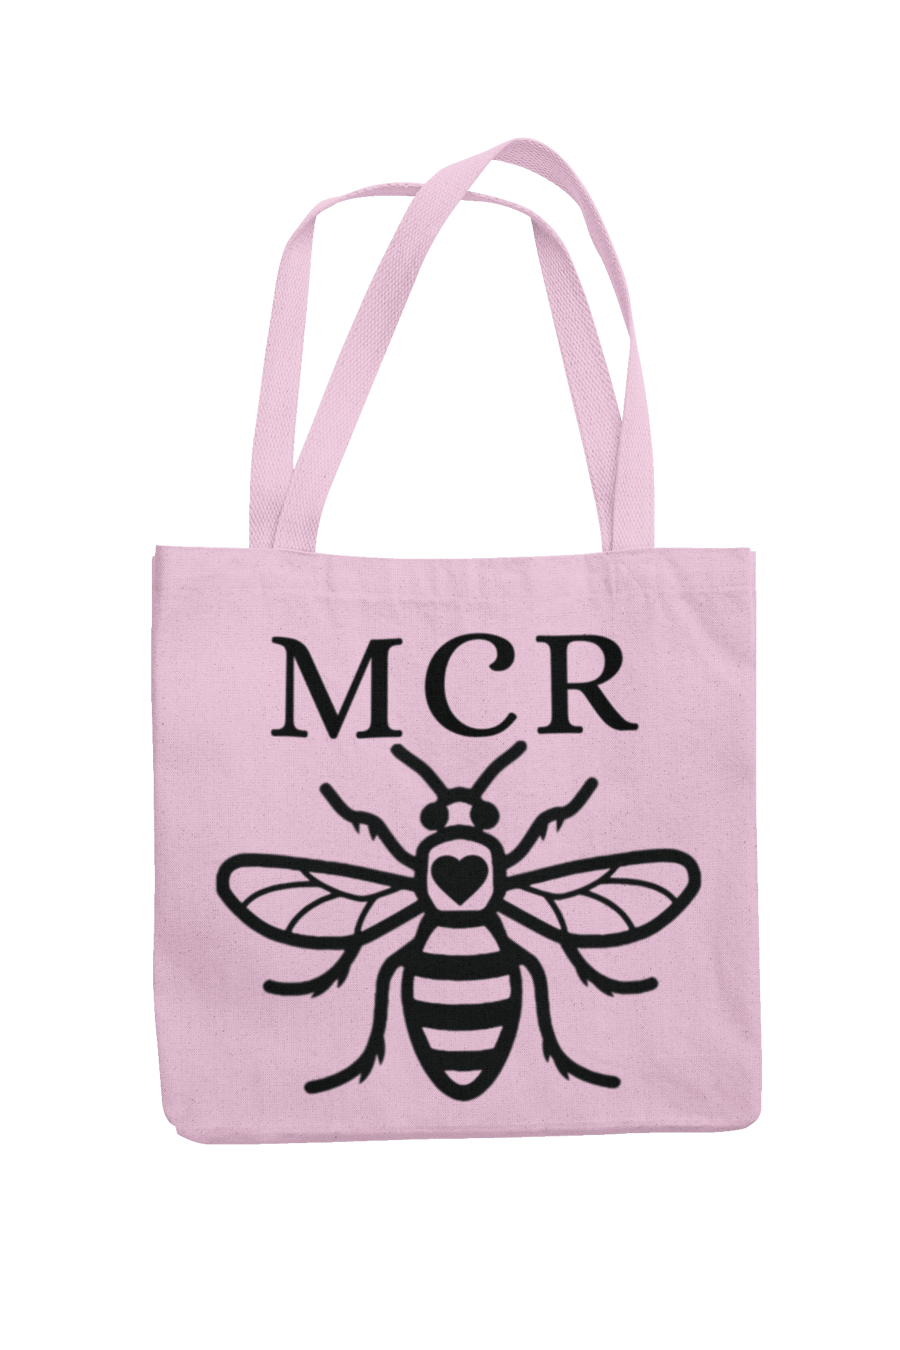 Manchester Bee Tote Bag -M C R